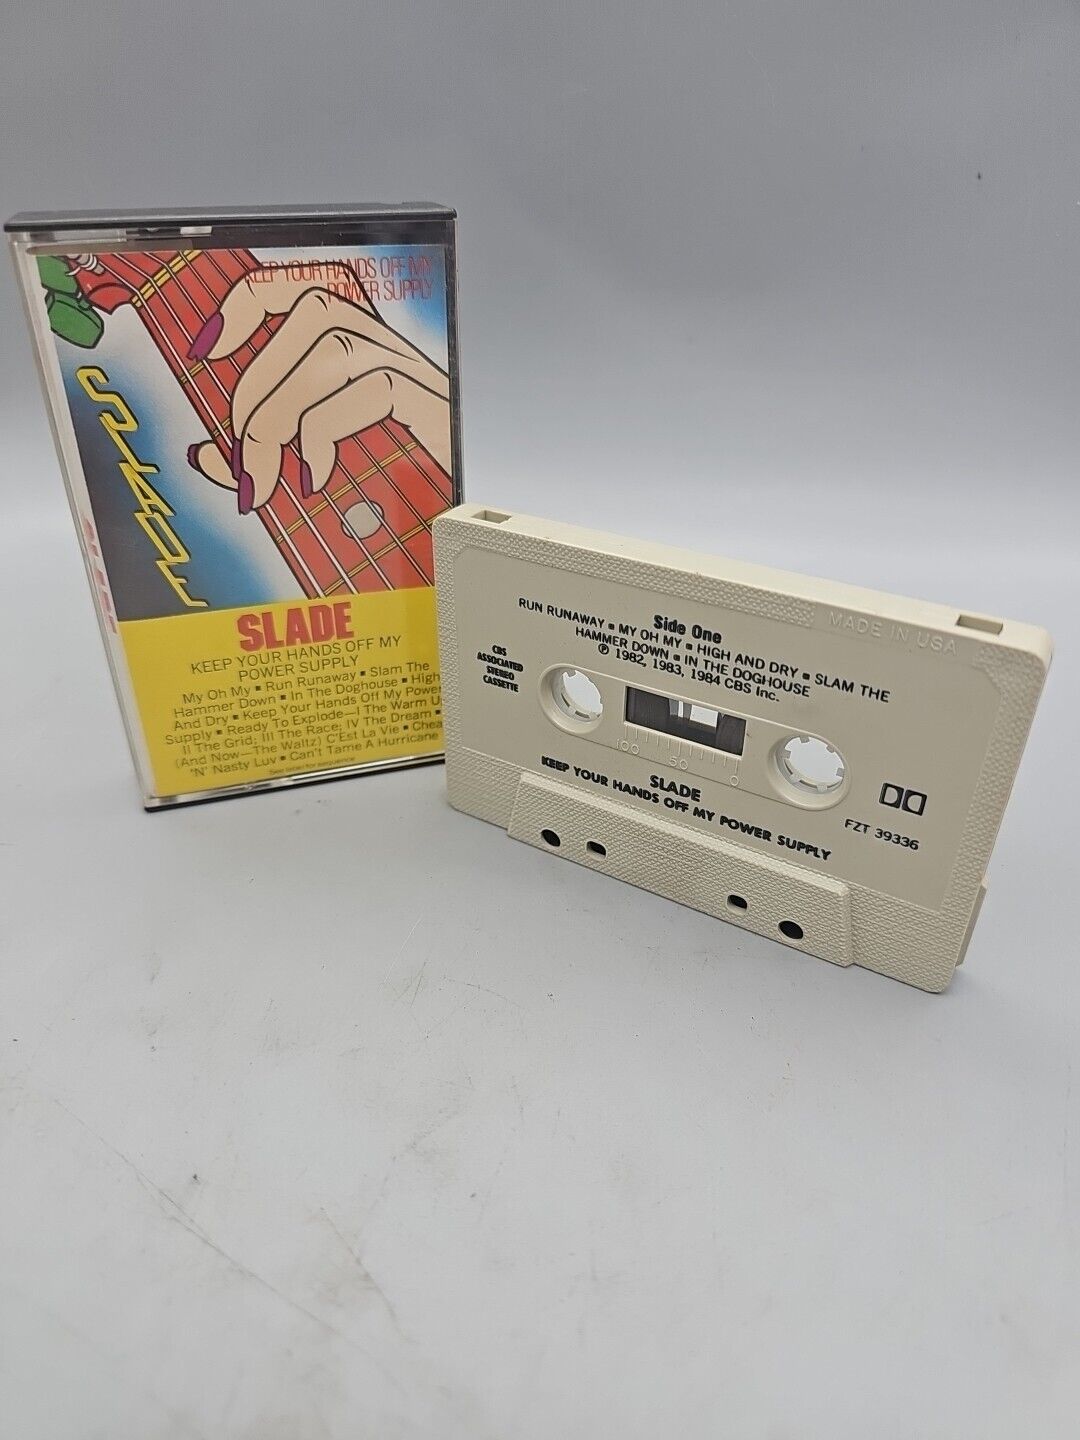 Slade - Keep Your Hands off My Power Supply (Cassette)